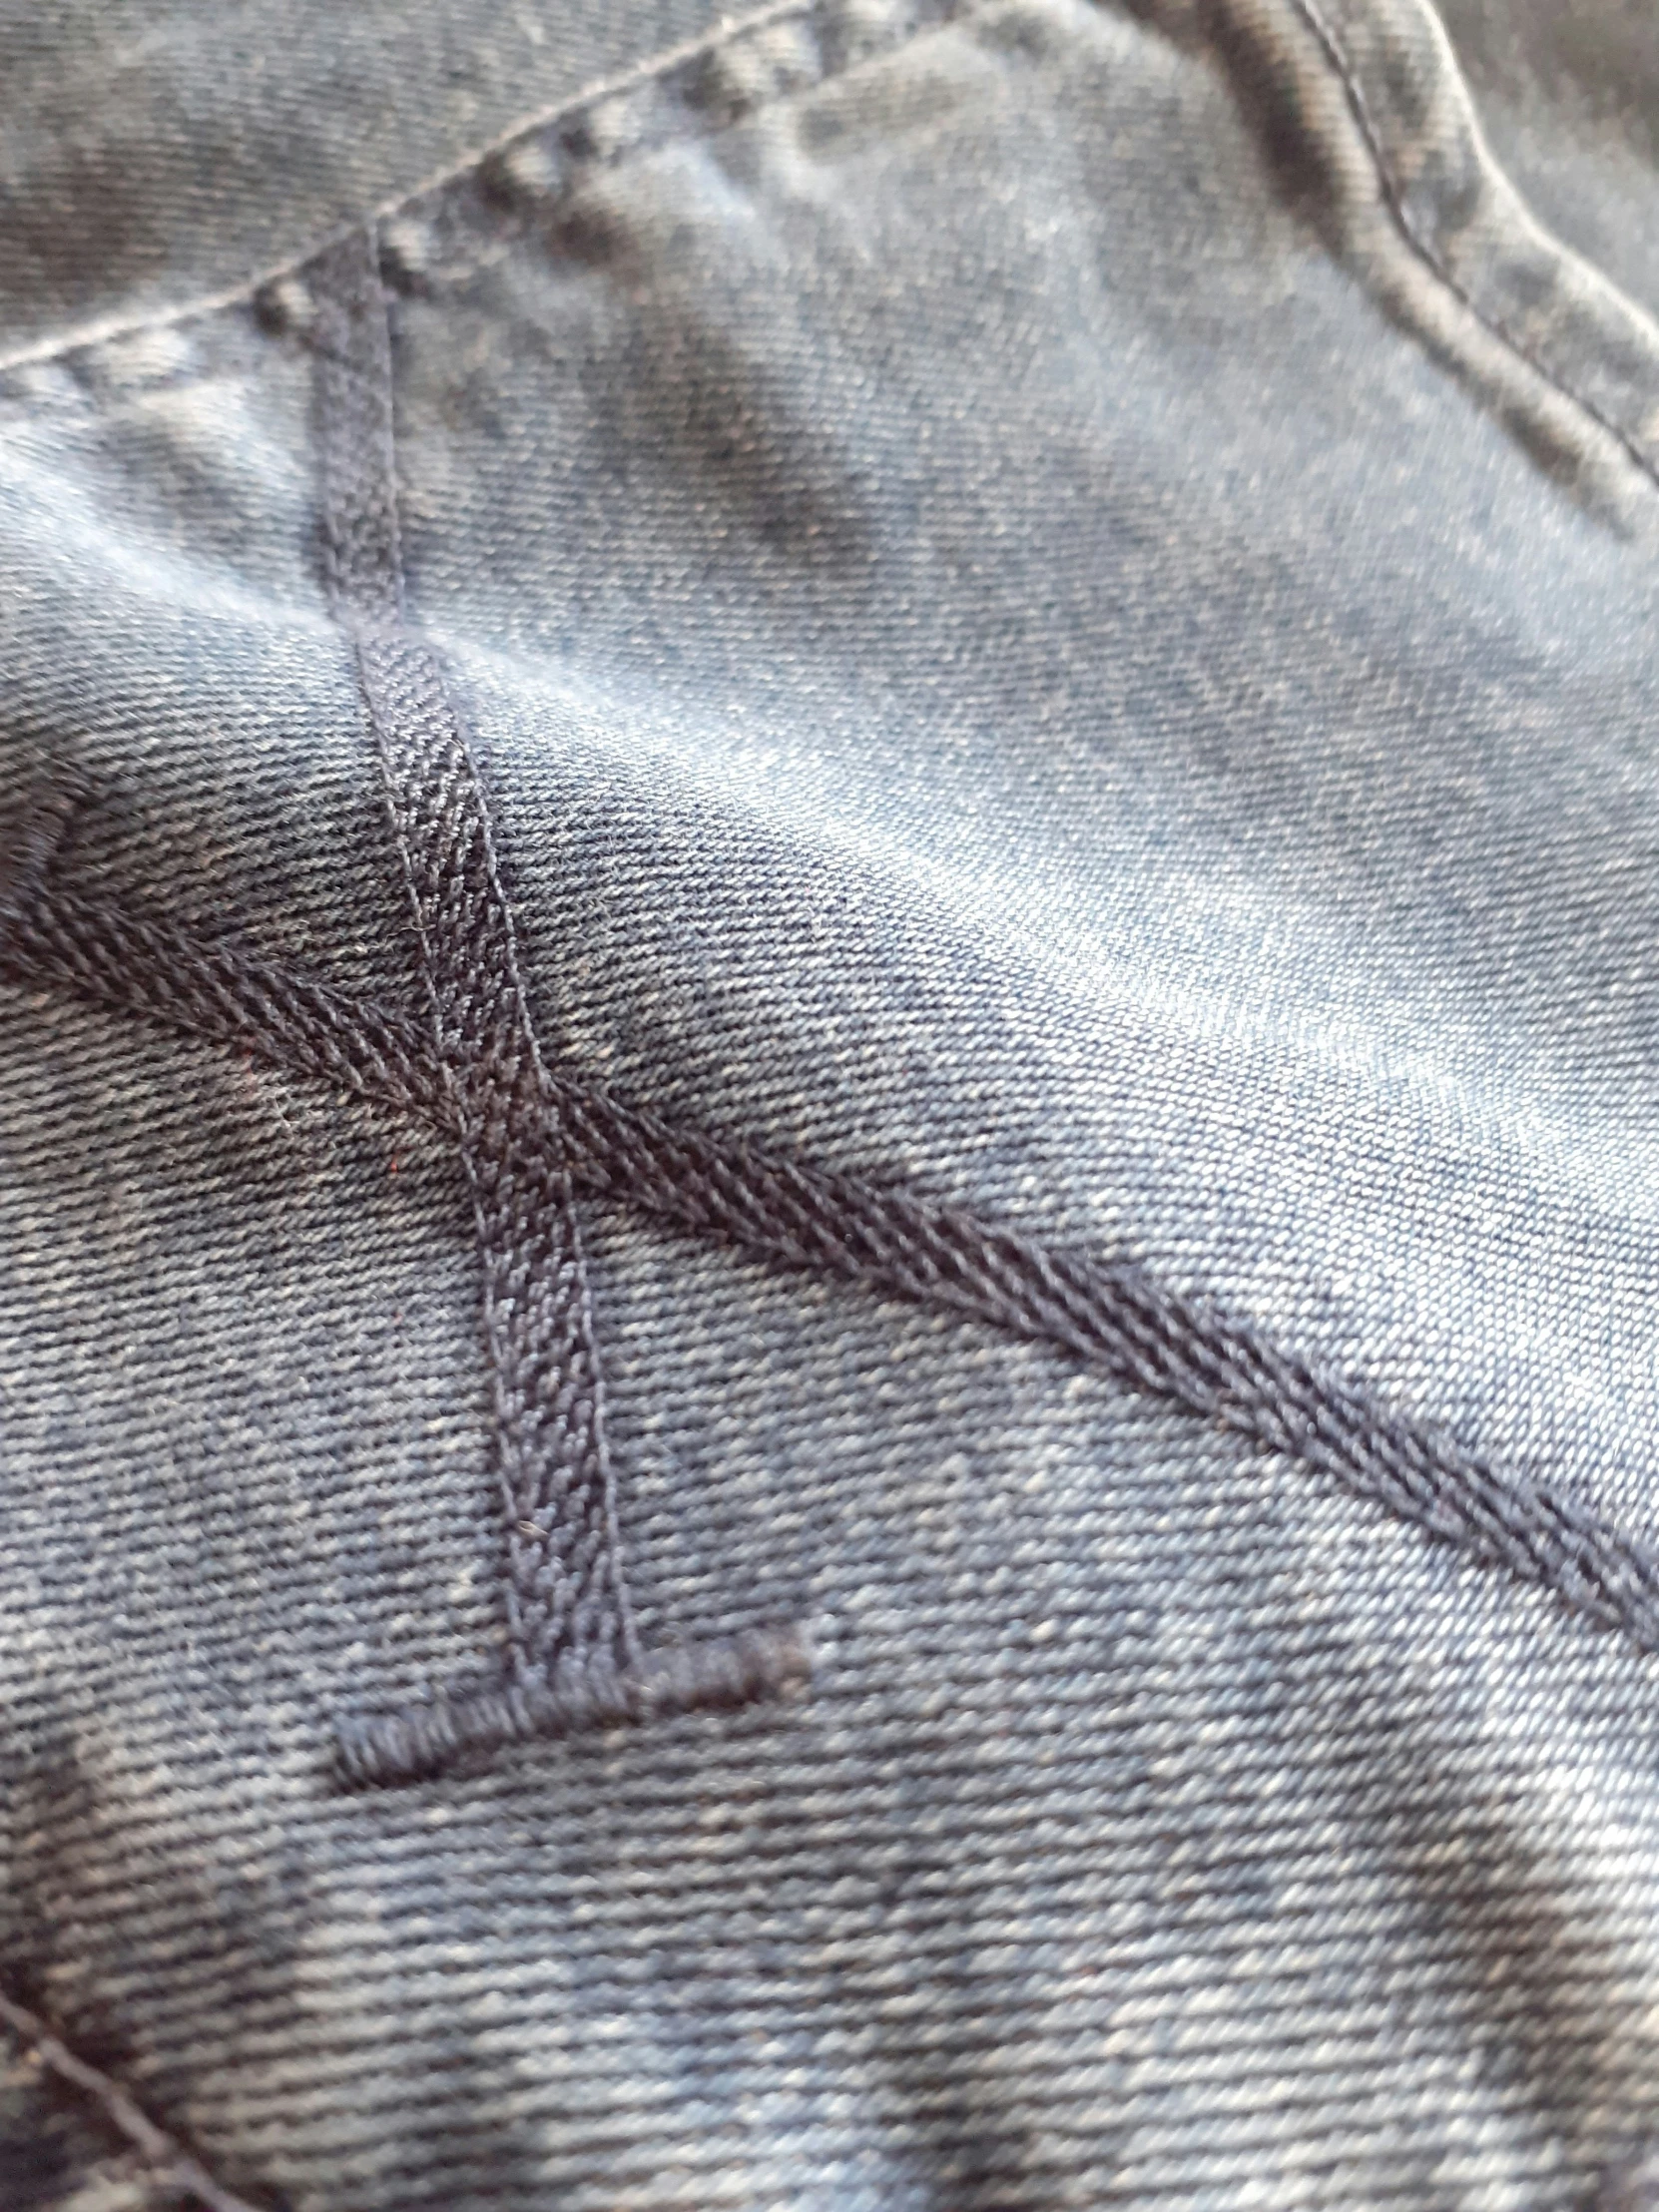 stitchwork on blue jeans with some white pins in it